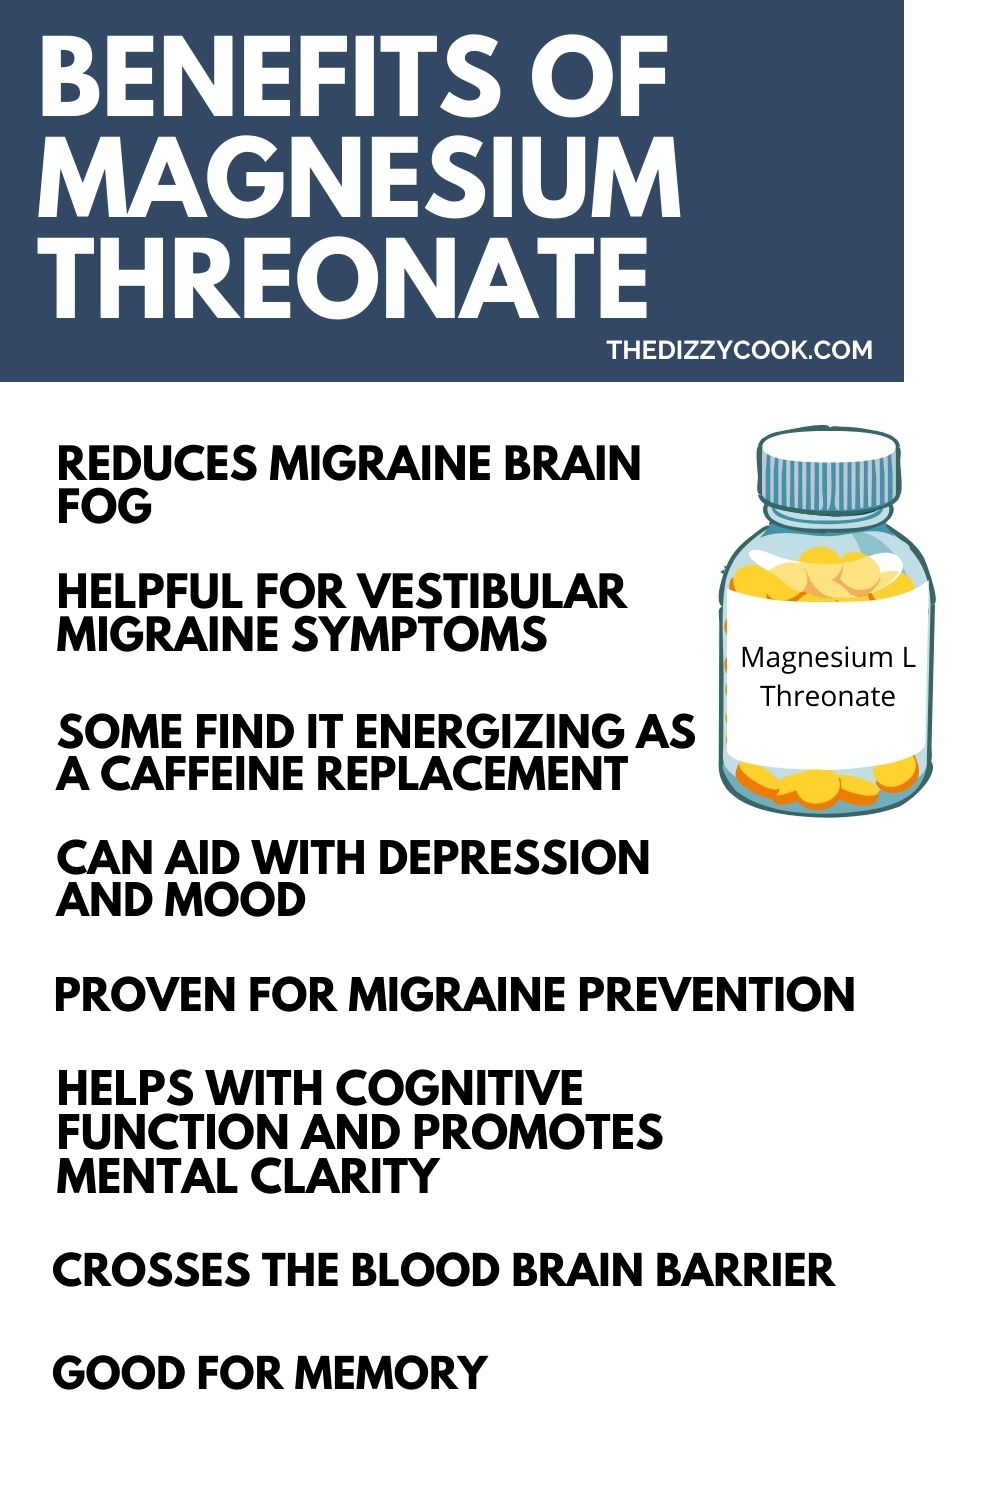 An infographic listing the benefits of magnesium threonate